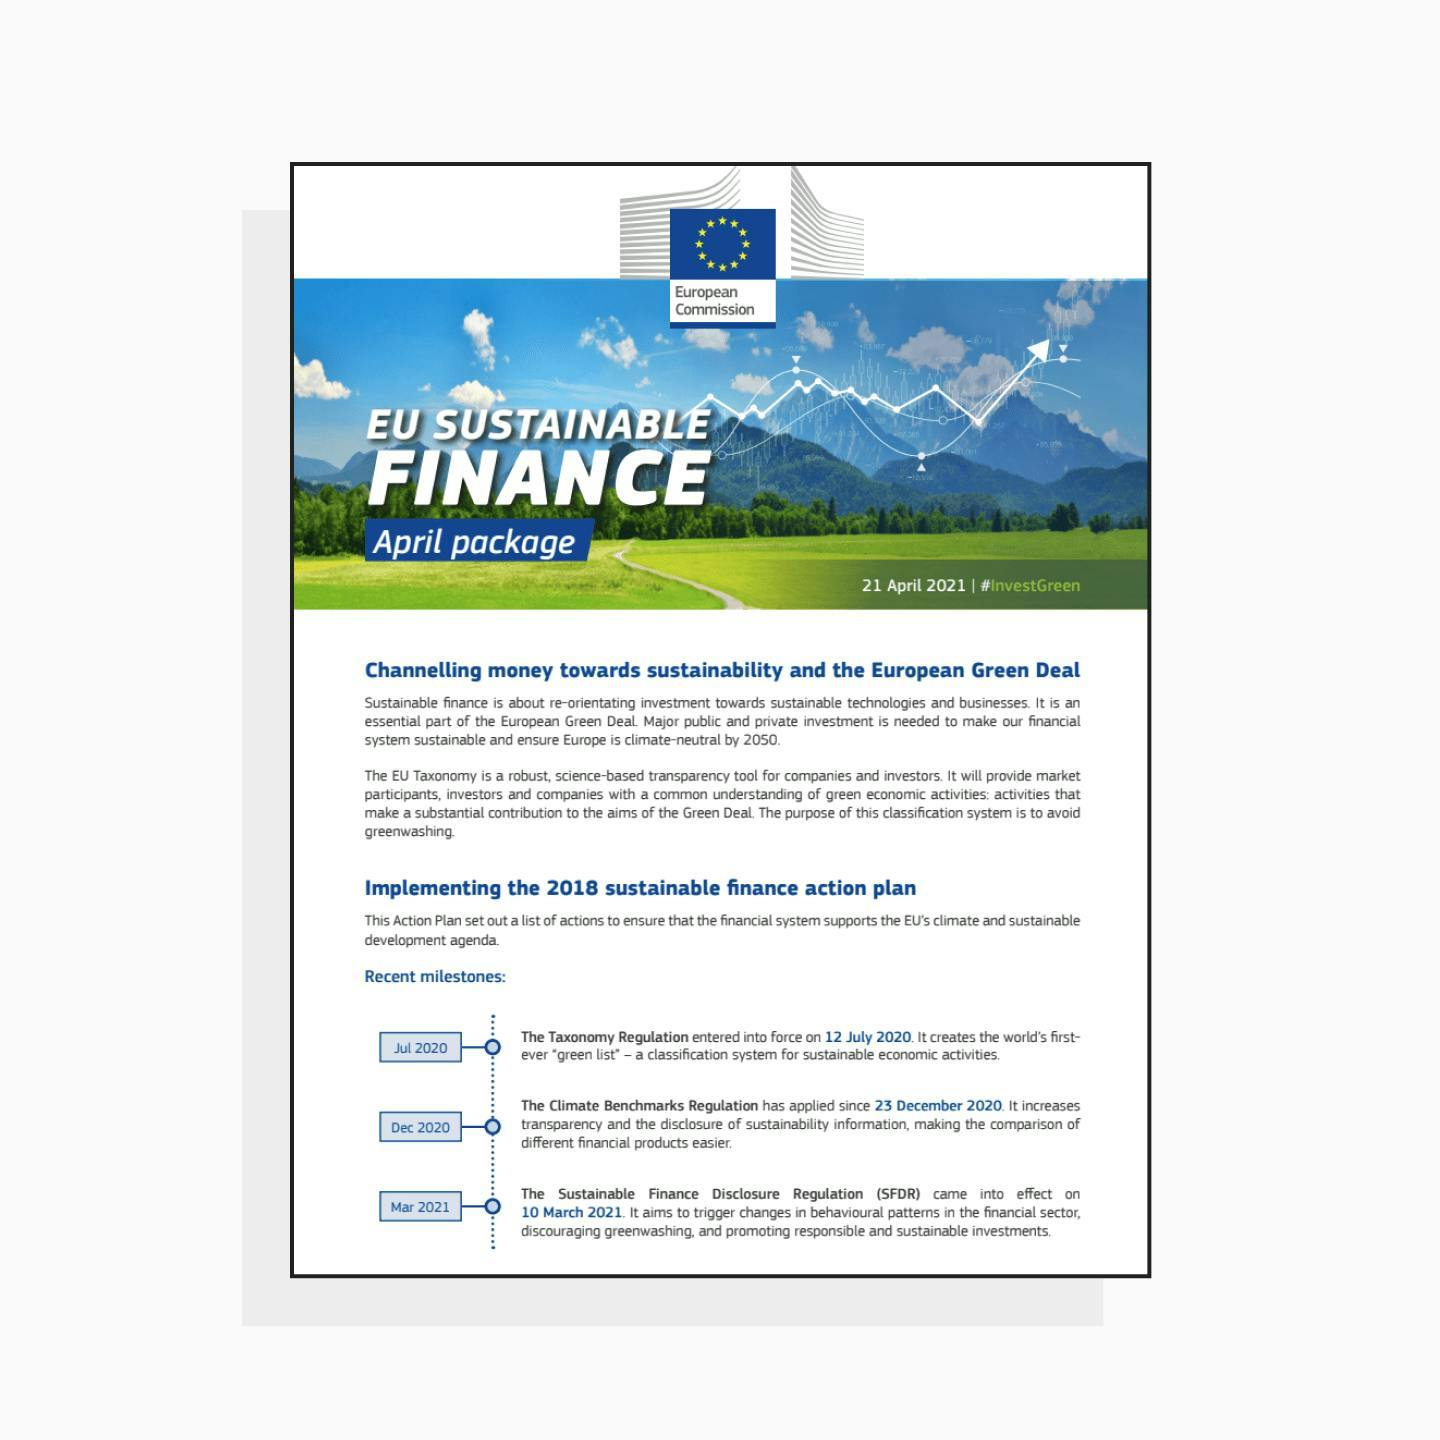 EU sustainable finance - April package